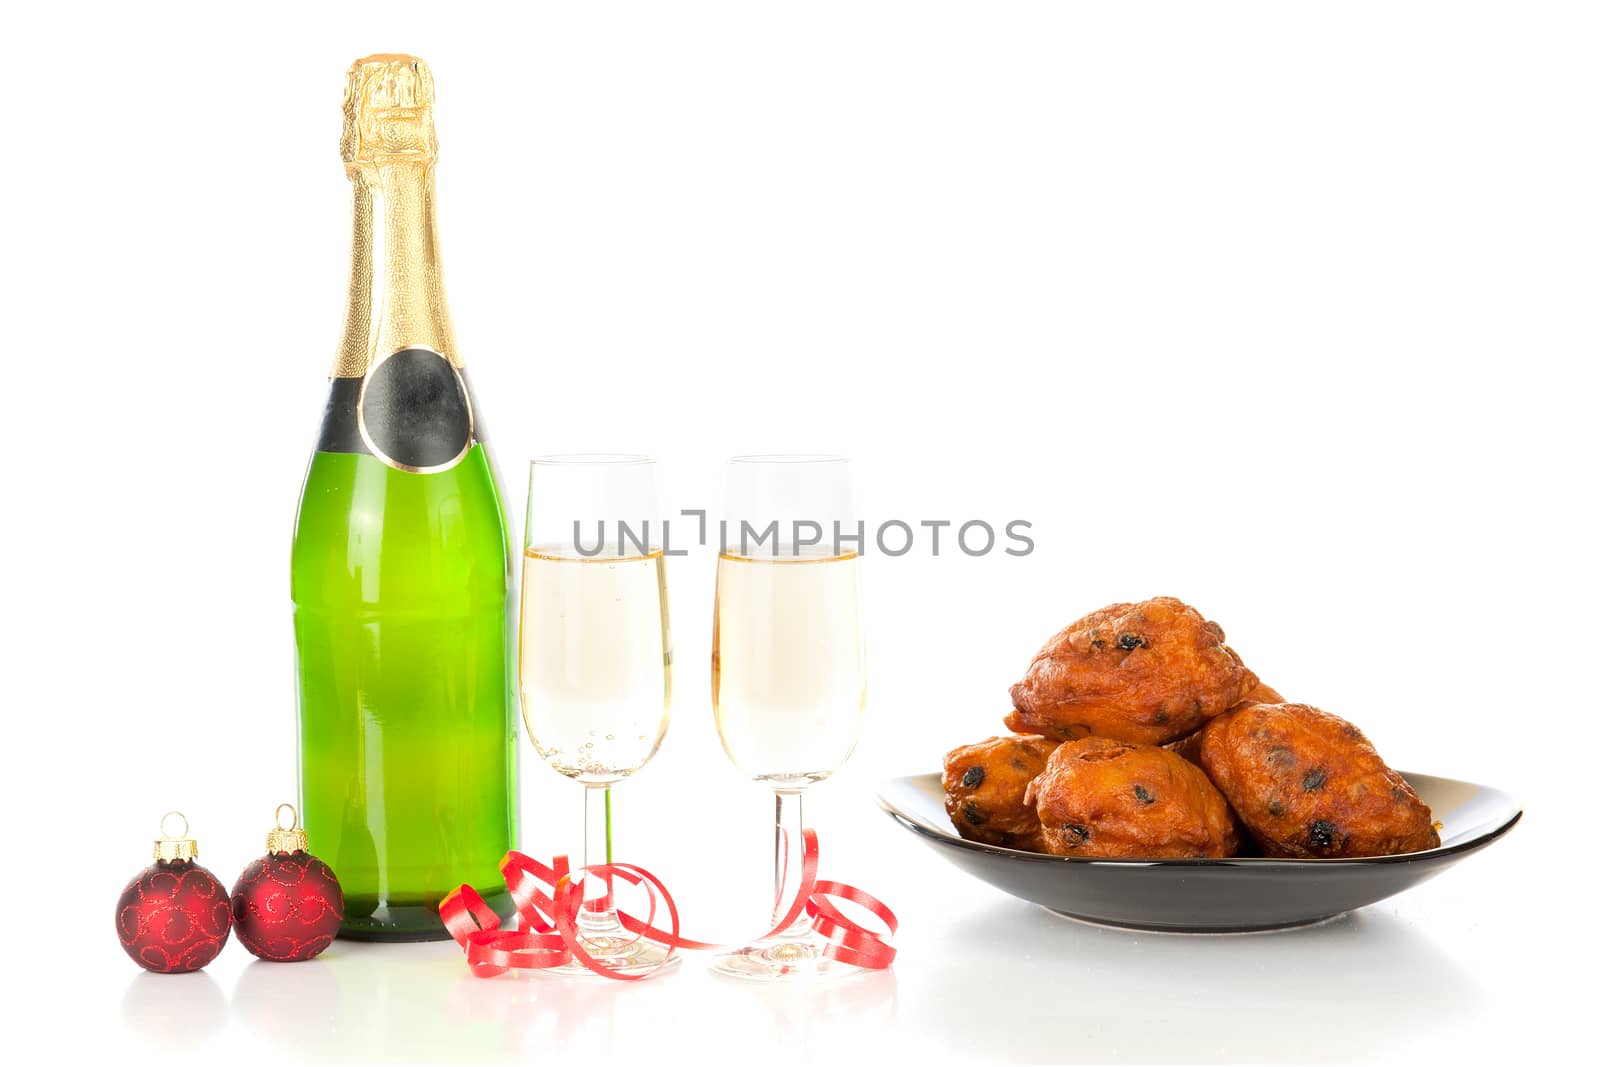 Celebrating new year with champagne and Oliebollen!